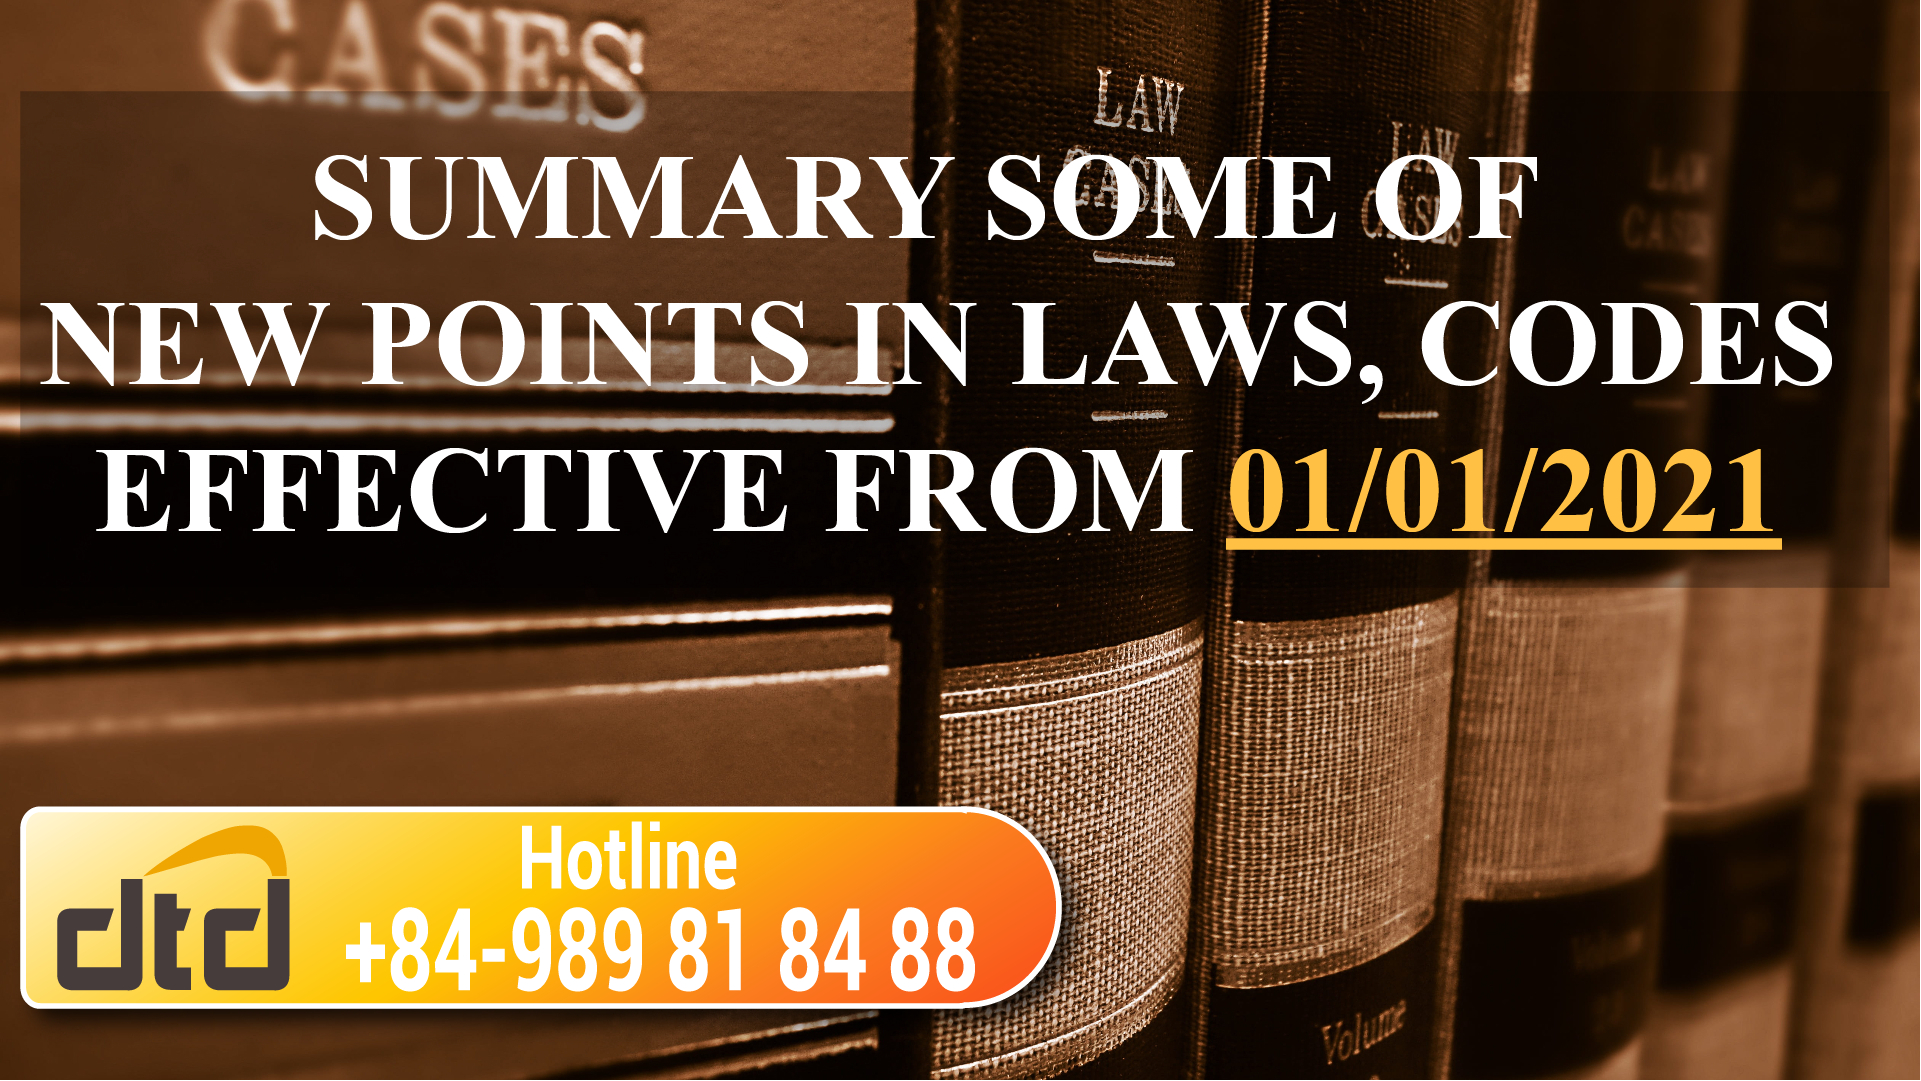 SUMMARY SOME OF NEW POINTS IN LAWS, CODES EFFECTIVE FROM 01/01/2021